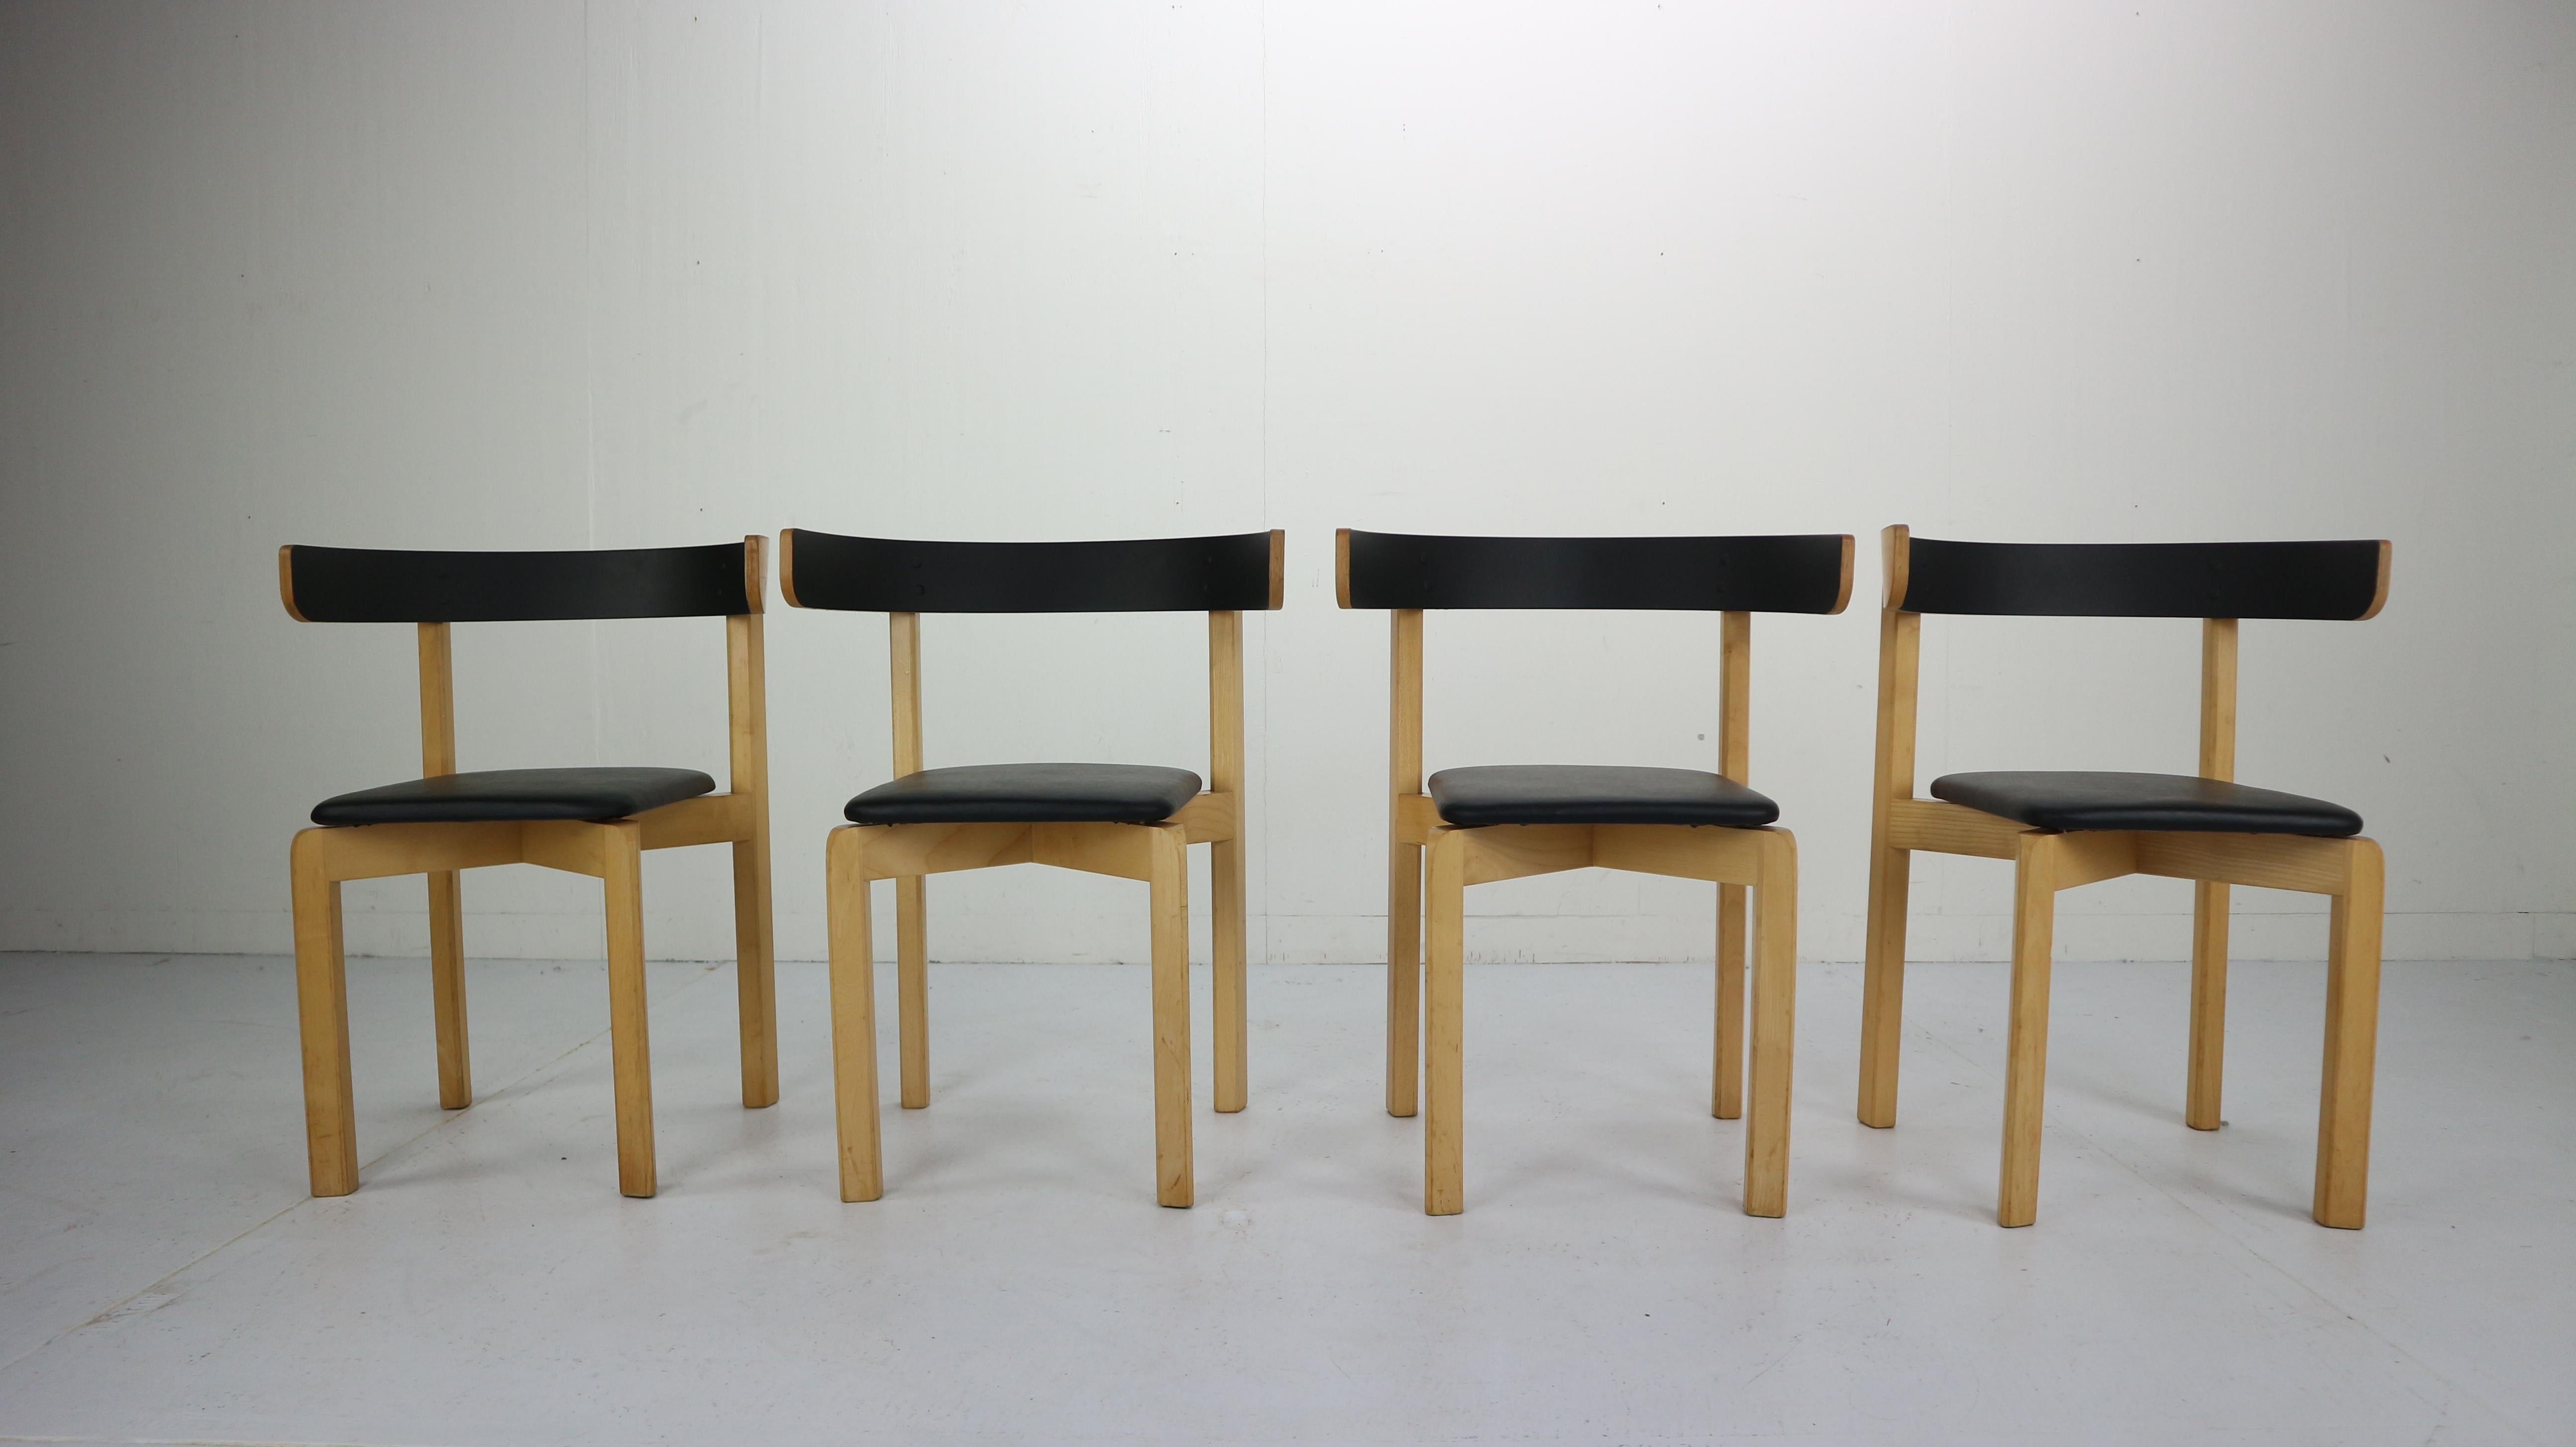 Set of 4 sculptural, circular dining room chairs.
Designed by MAA. Jørgen Gammelgaard - made by Sorø Møbelfabrik, Denmark in the 1970s.
The maple wooden frame, seating is covered in black faux leather. Backrest painted in black lacquer.
Elegant